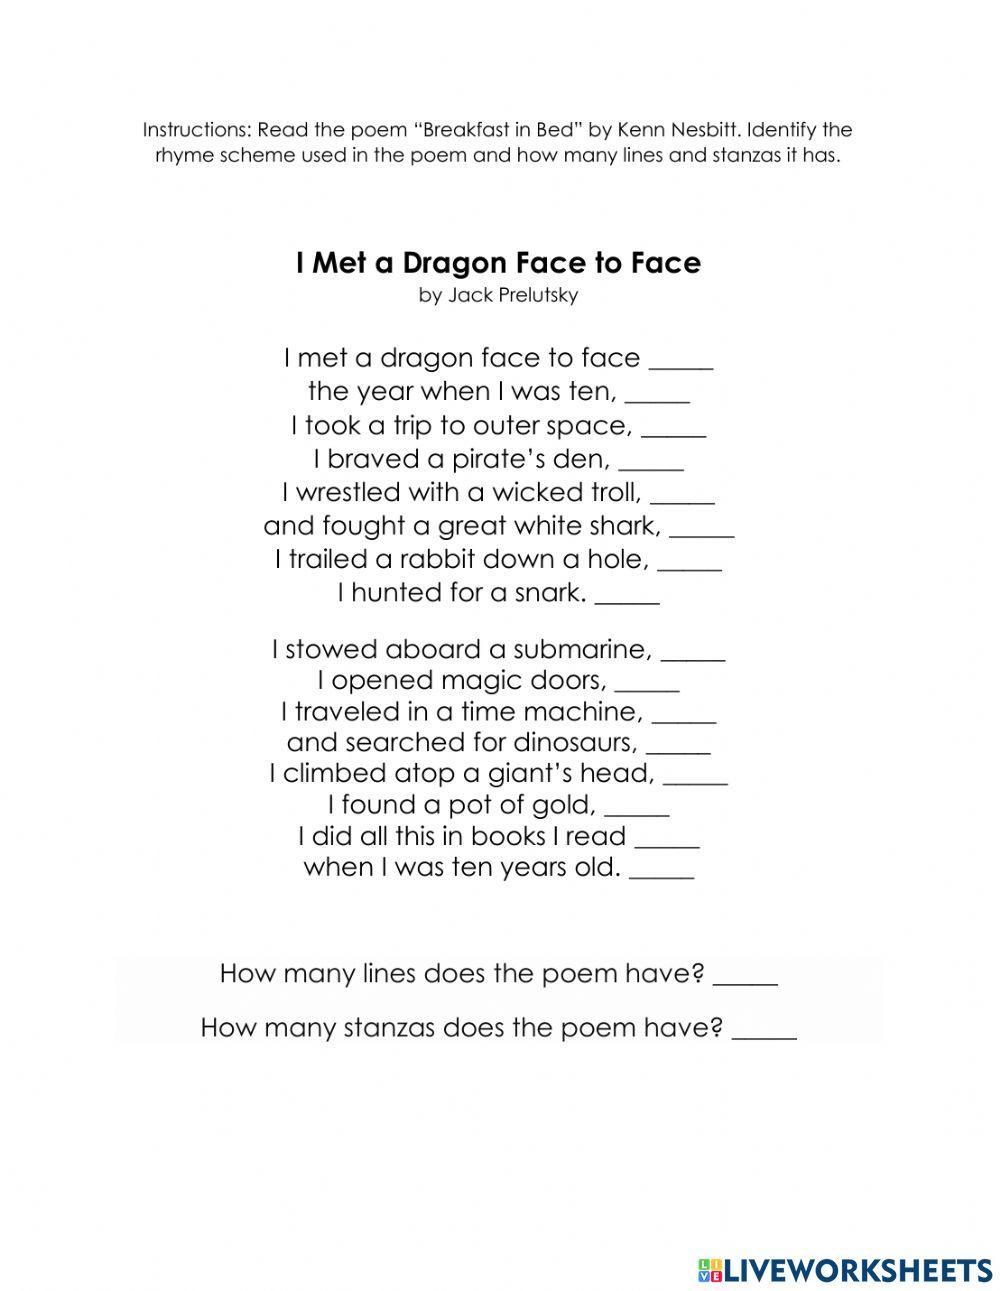 Rhyme Scheme: -I Met a Dragon Face to Face- poem